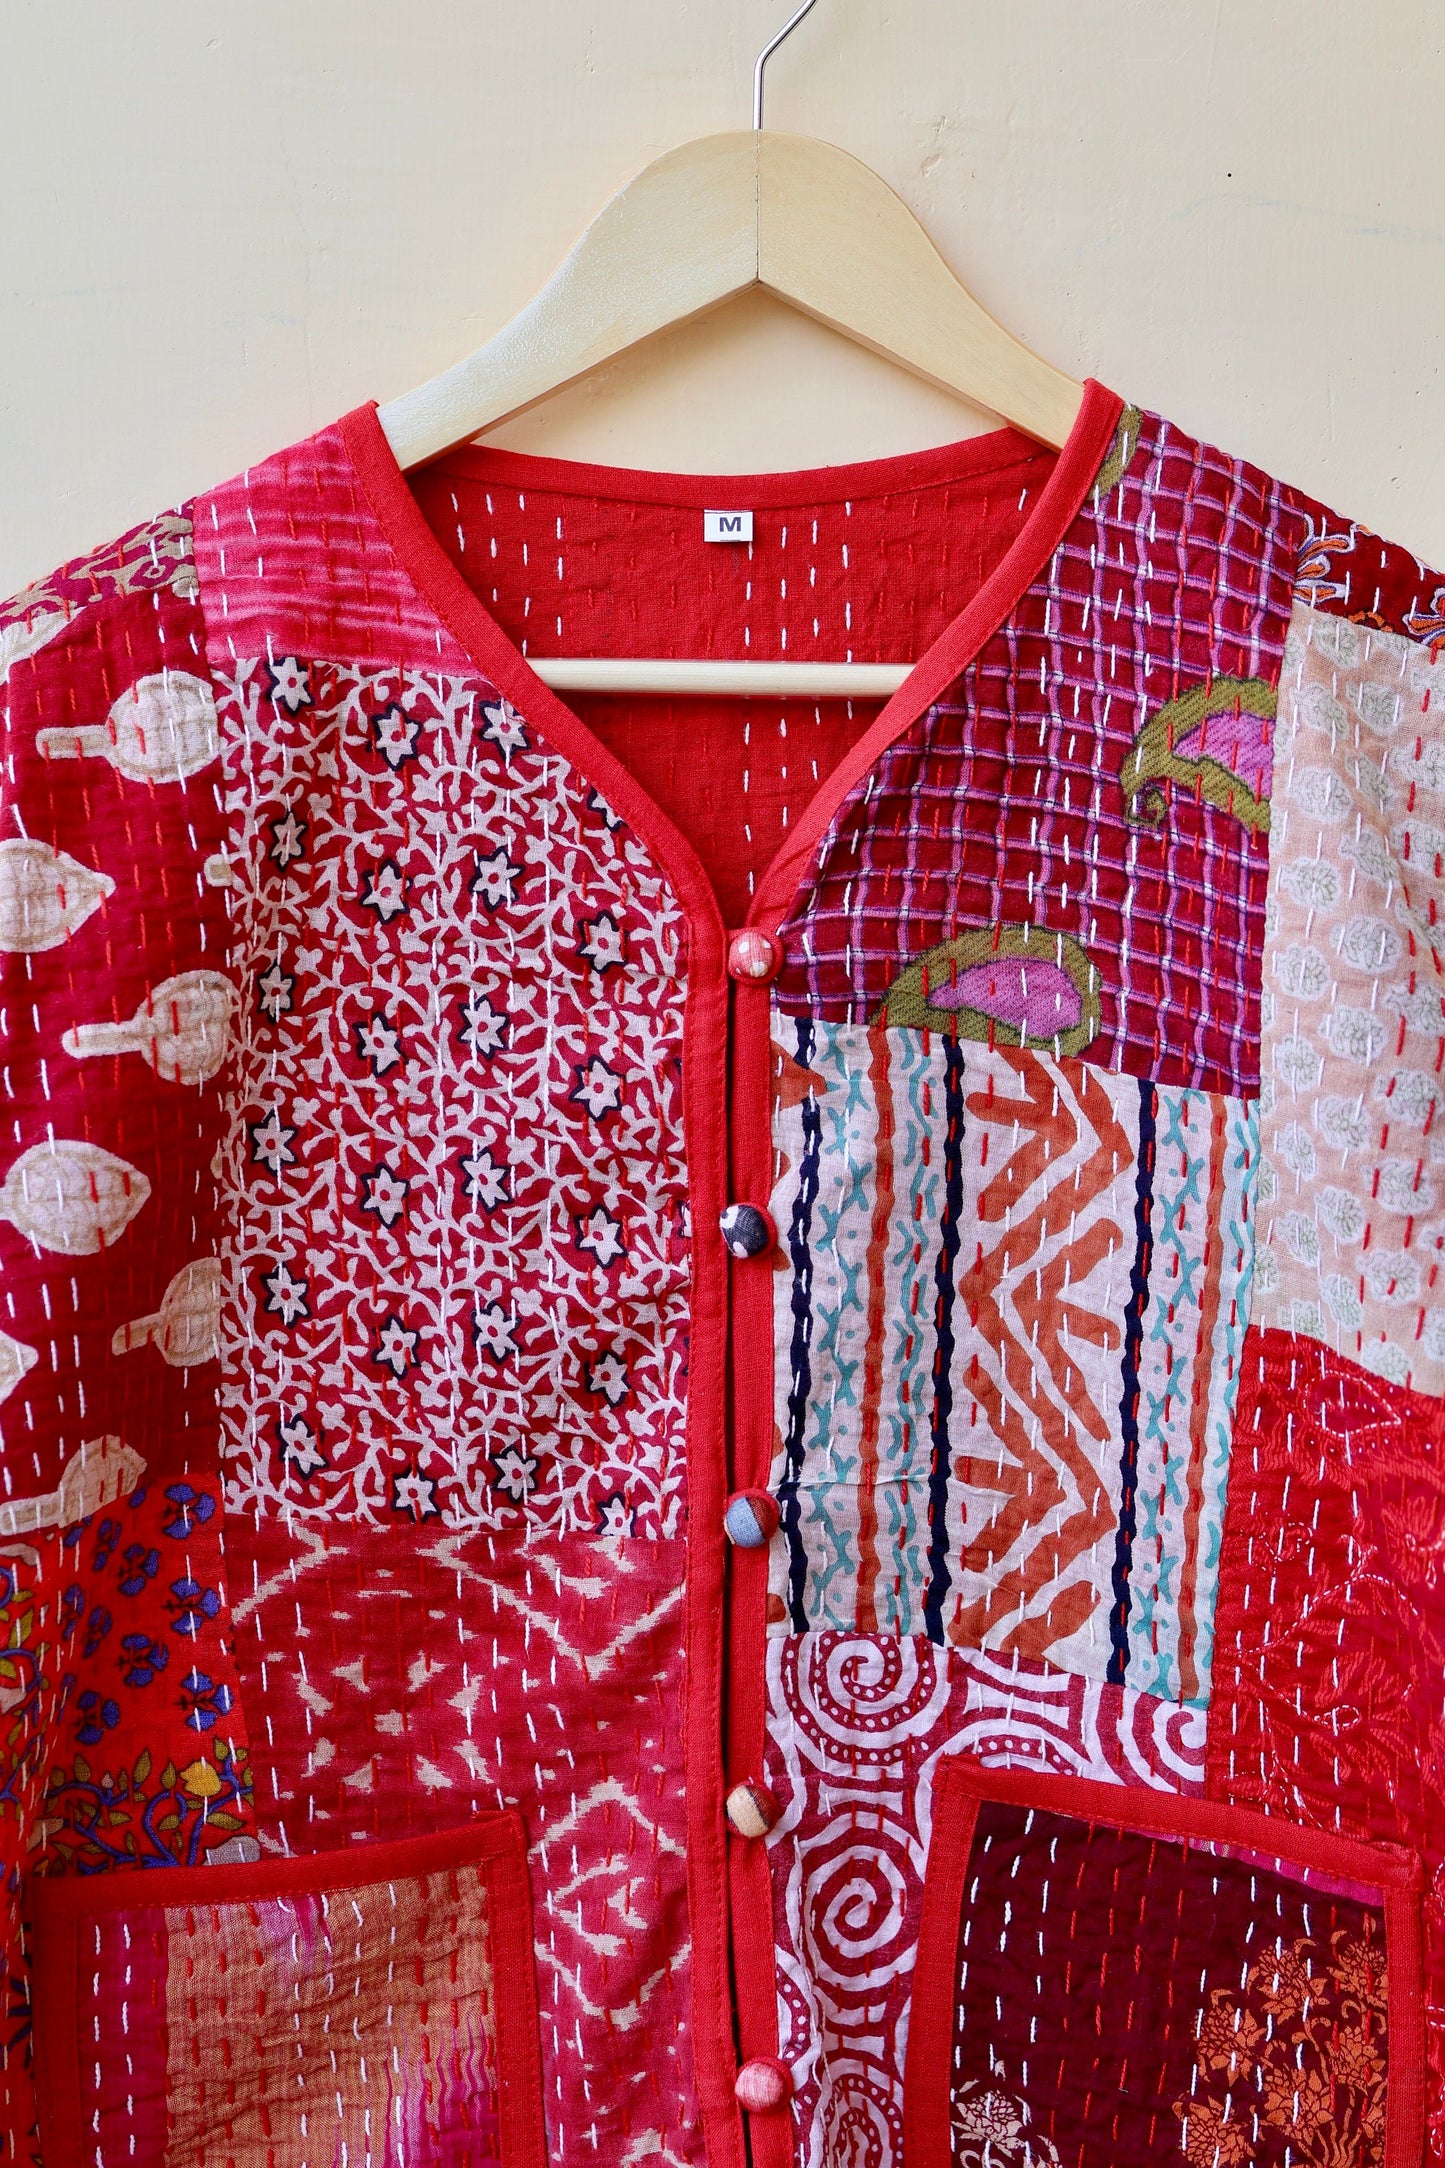 Indian Handmade Red Kantha Patchwork Quilted Jacket, Stylish Patchwork Women's Coat, Winter Spring Reversible Kantha Jacket for Her